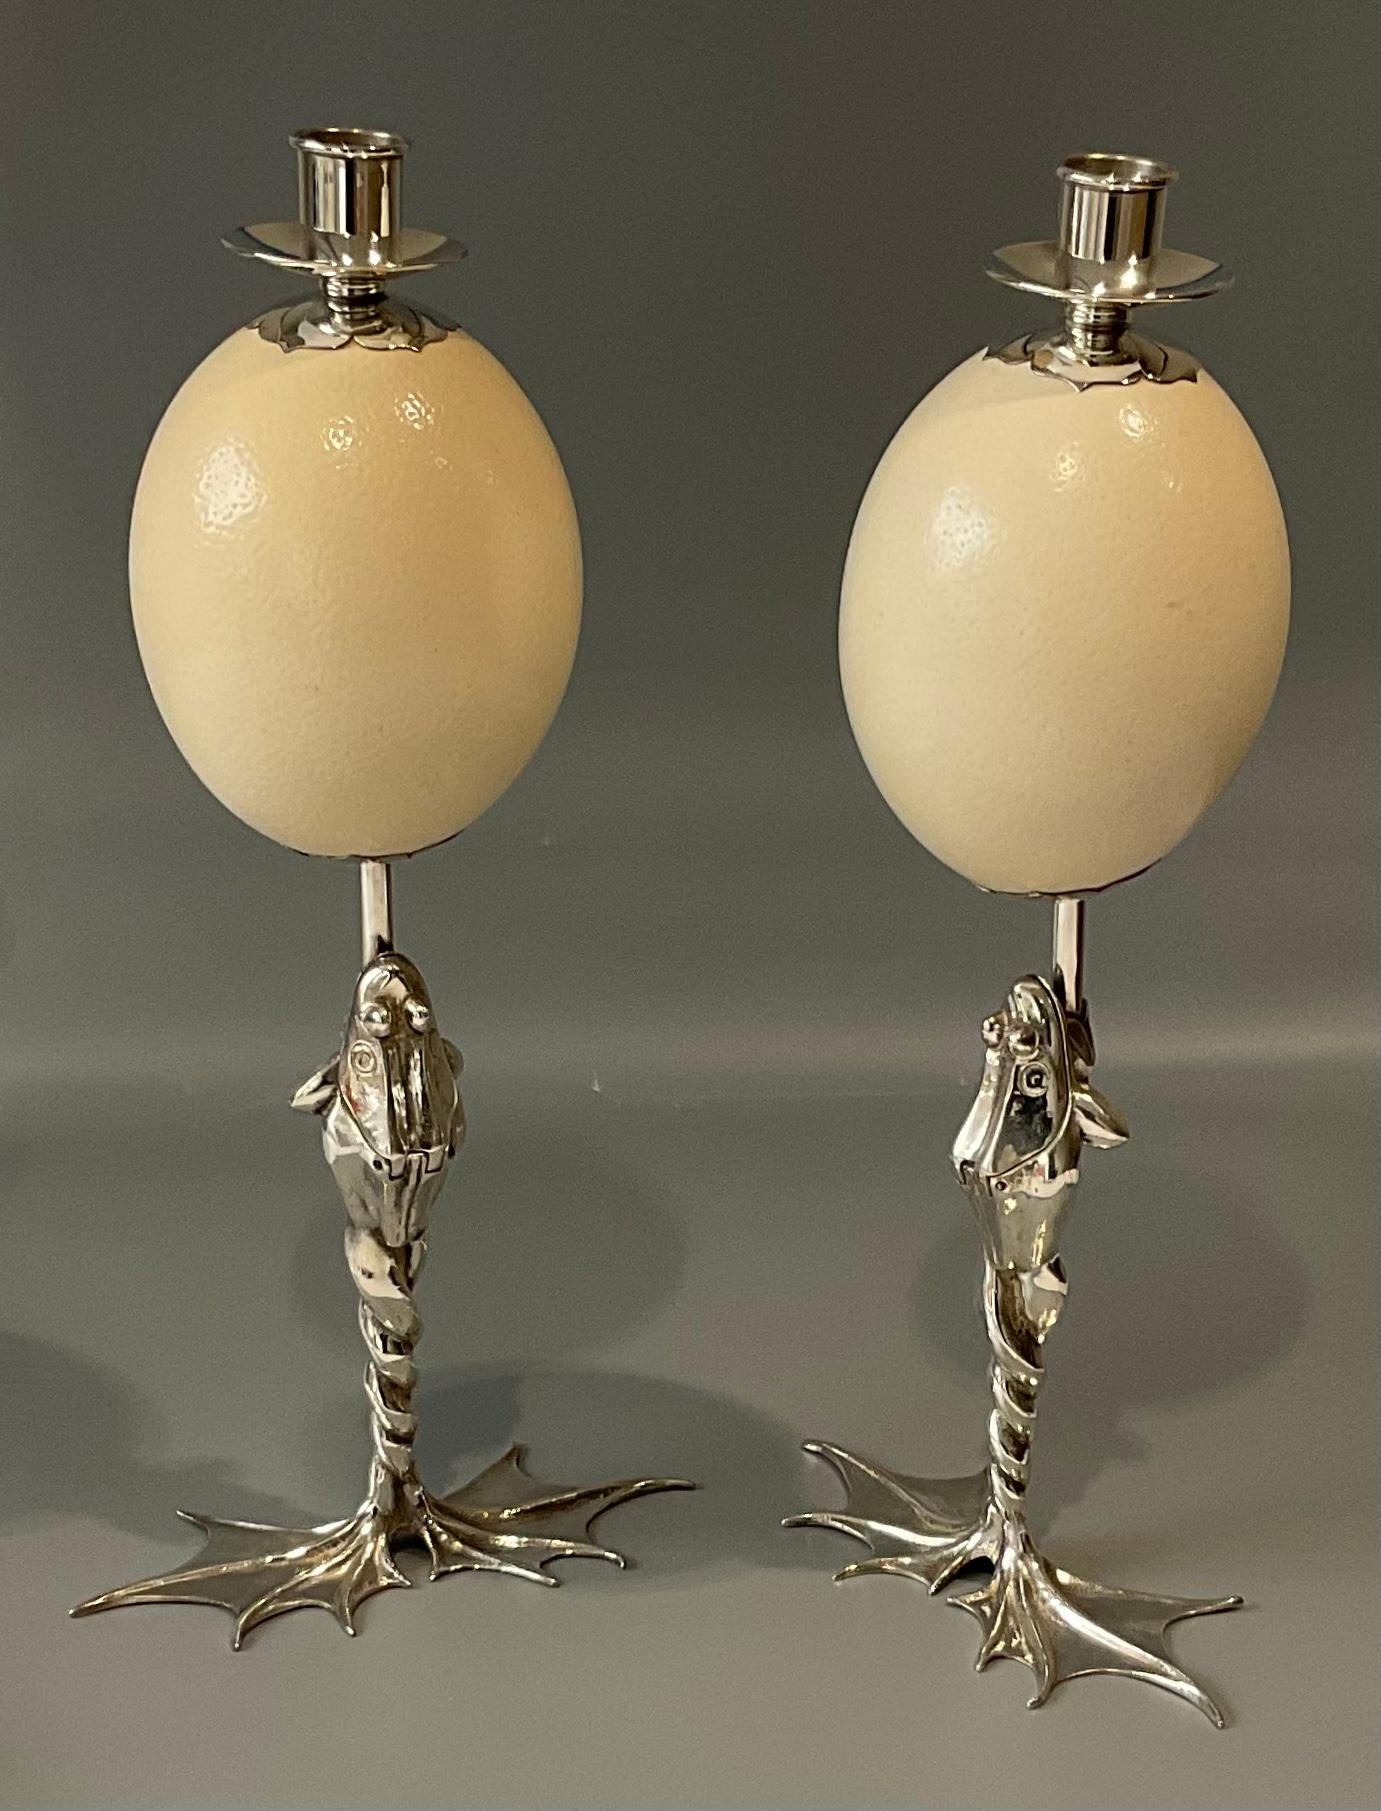 Amazing frog and ostrich egg pair of candle holders by Anthony Redmile. Breathtaking design for the most discerning collector. Will enhance any interior with the unique style and design. 

Anthony Redmile was one of the leading eccentric designers